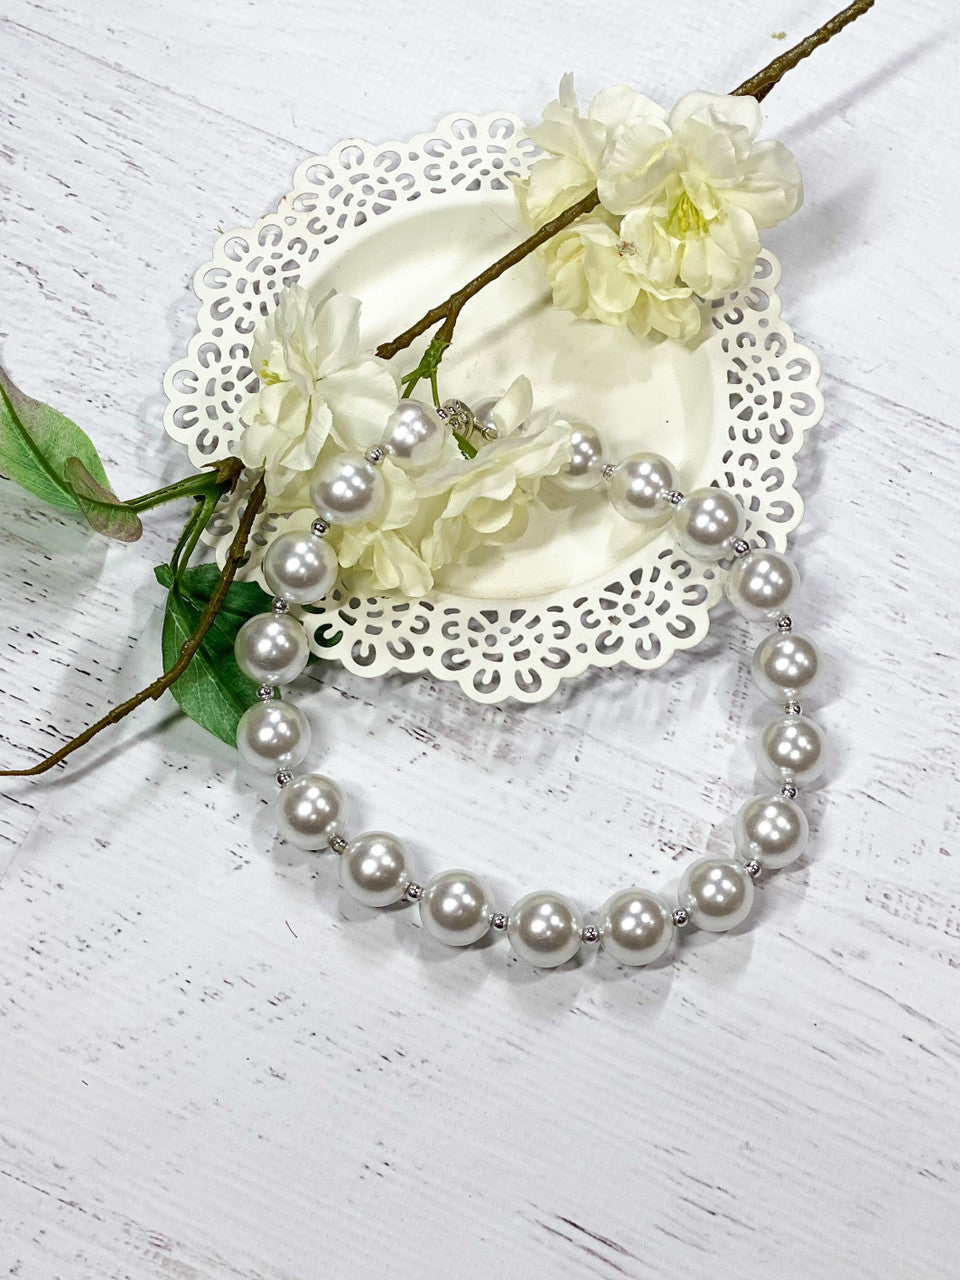 White chunky bead necklace, approximately 17"